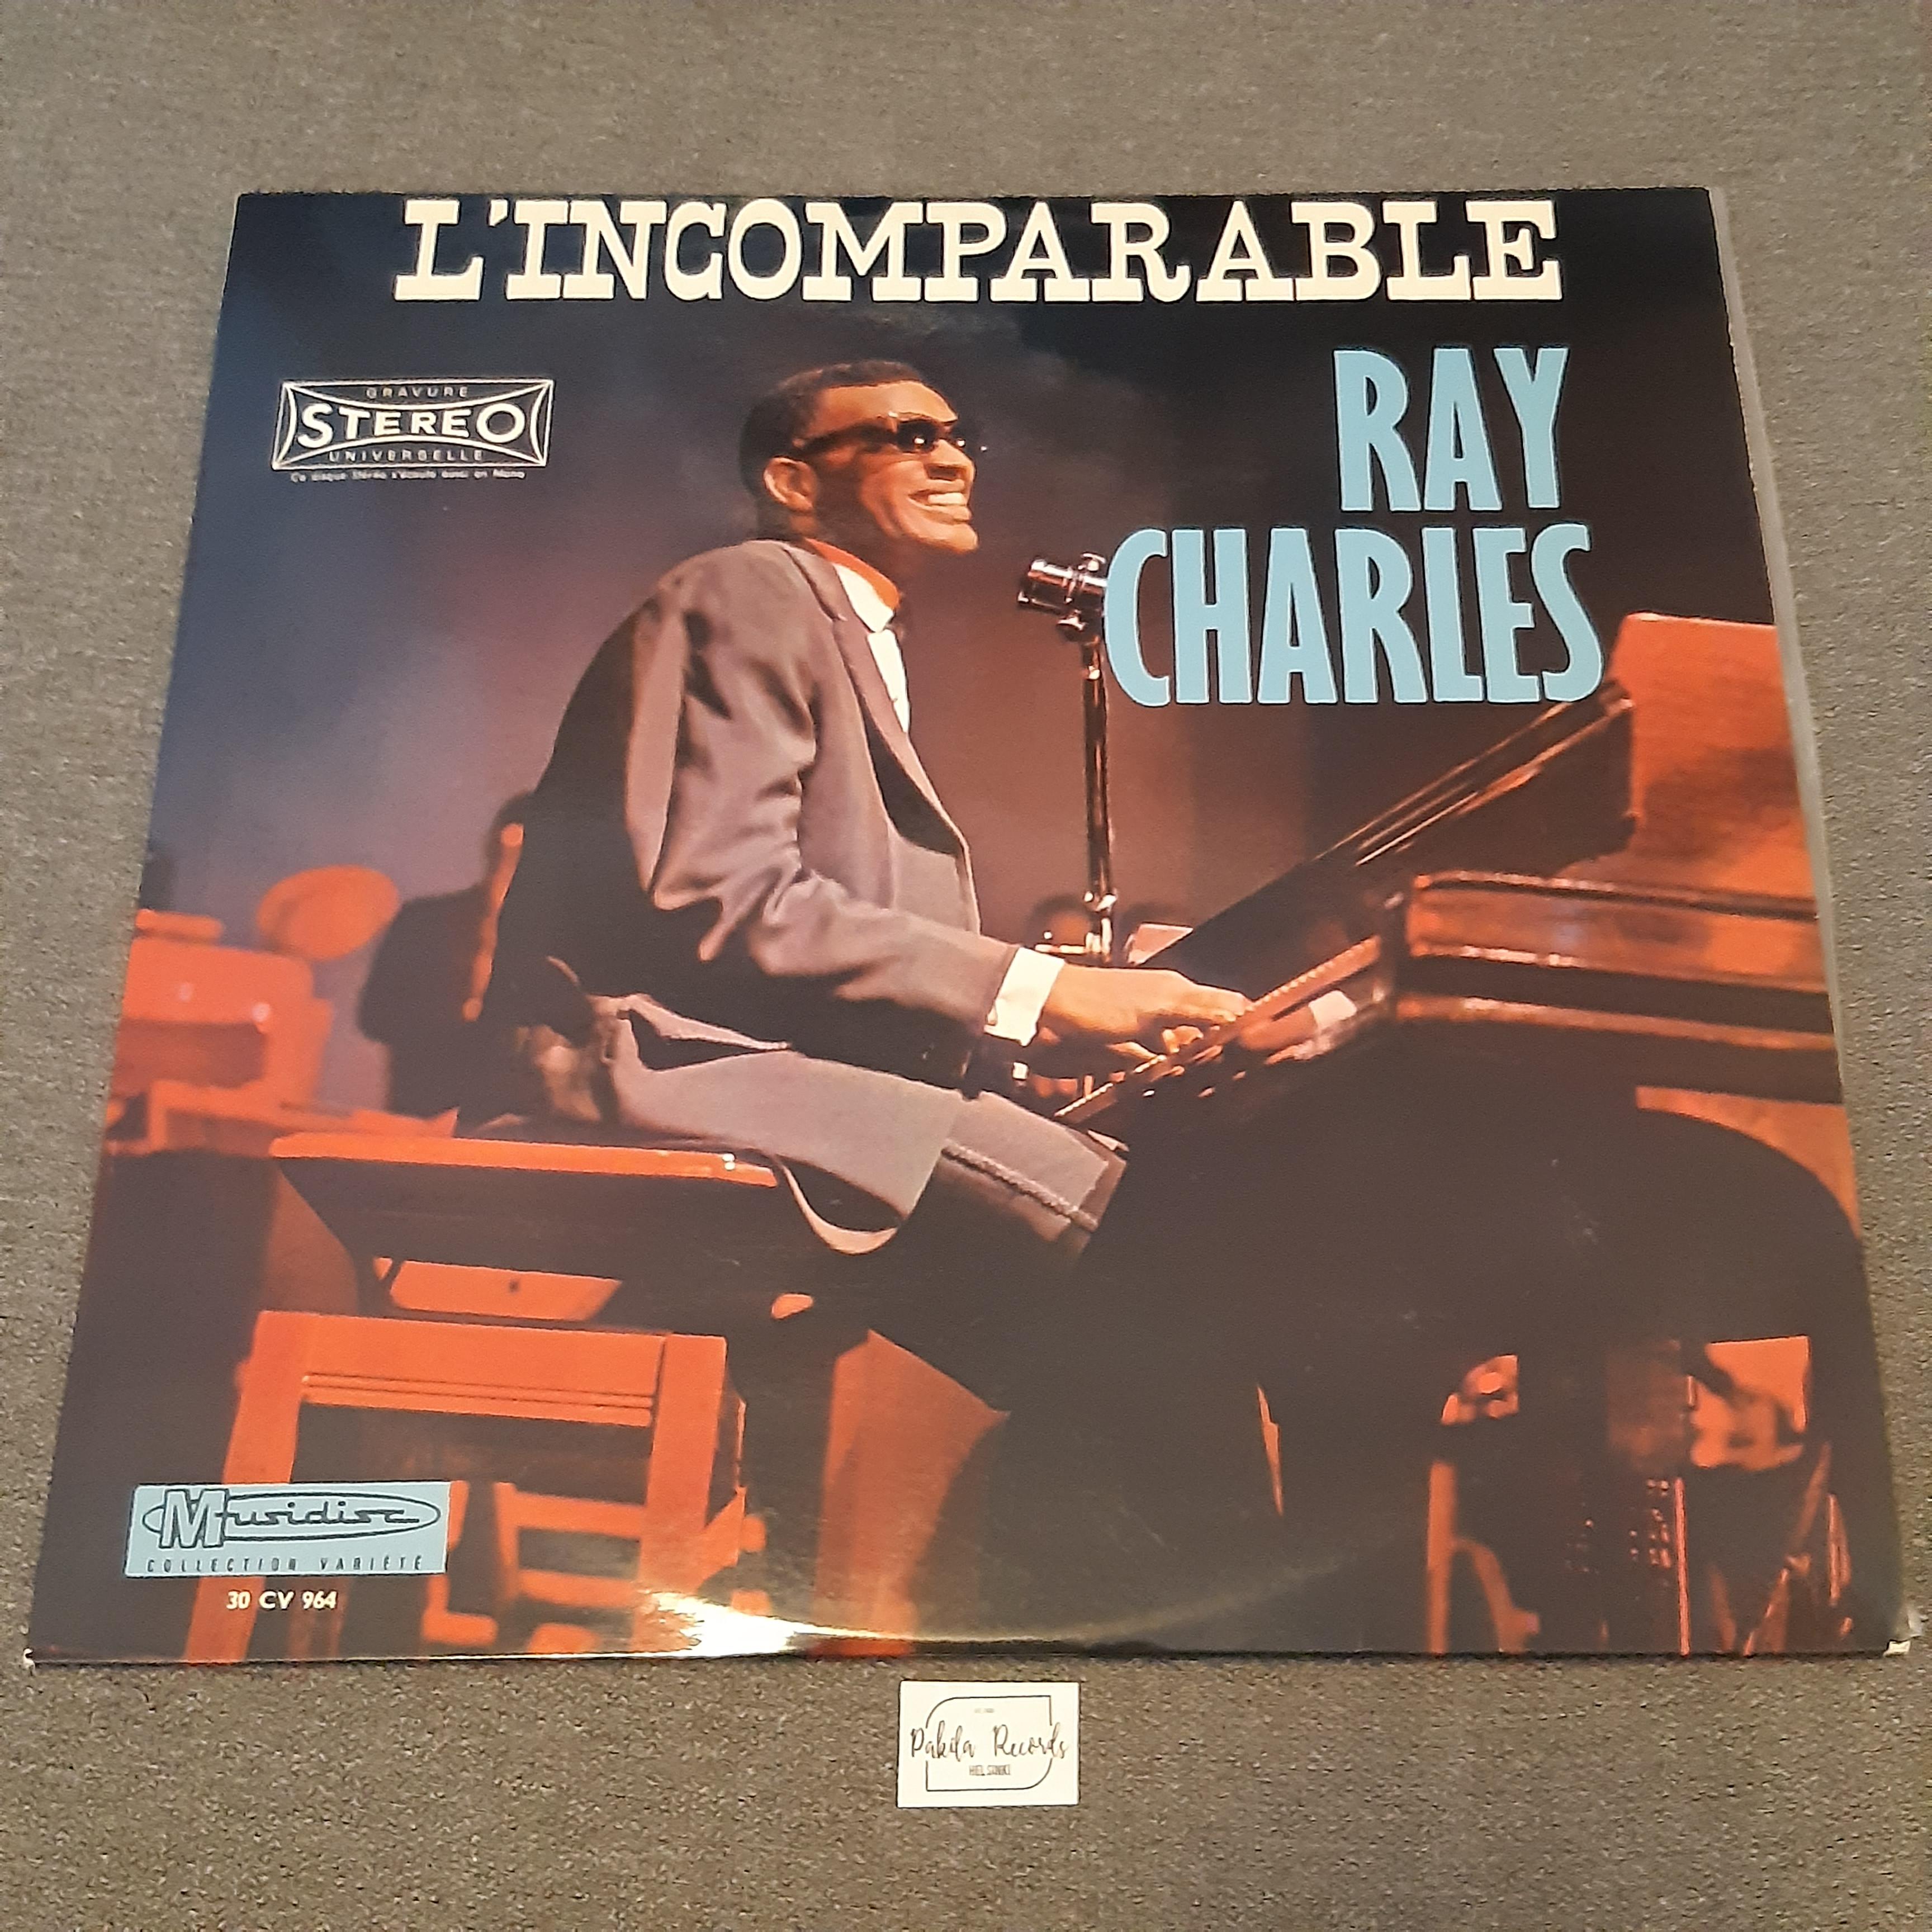 Ray Charles - L 'Incomparable - LP (käytetty)